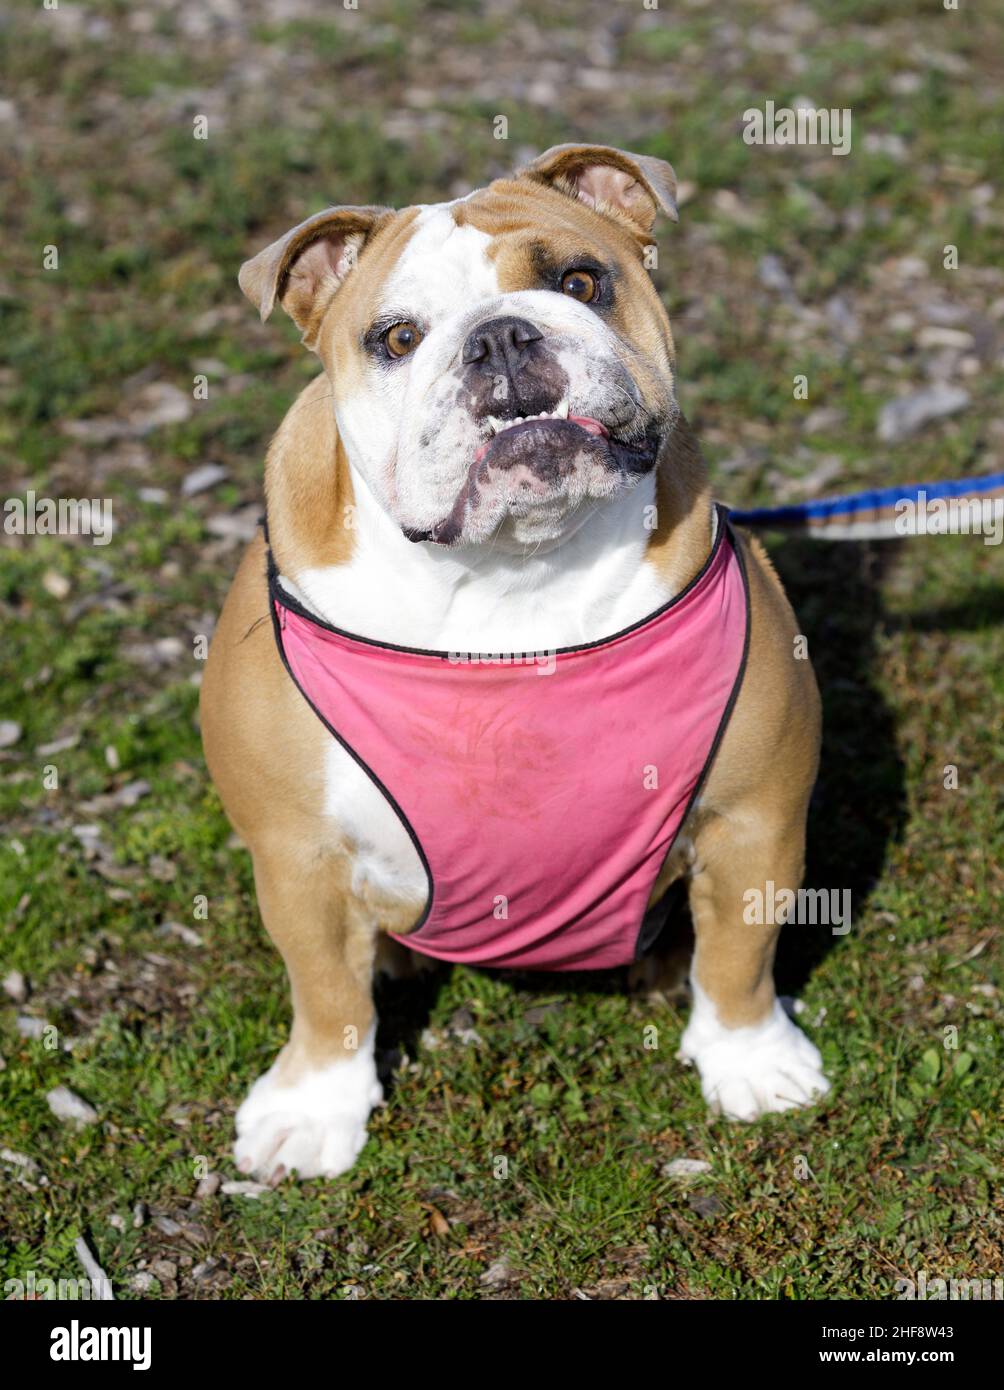 2-Year-Old Fawn Female English Bulldog Puppy Sitting and Looking at Camera. Dog park in Northern California. Stock Photo